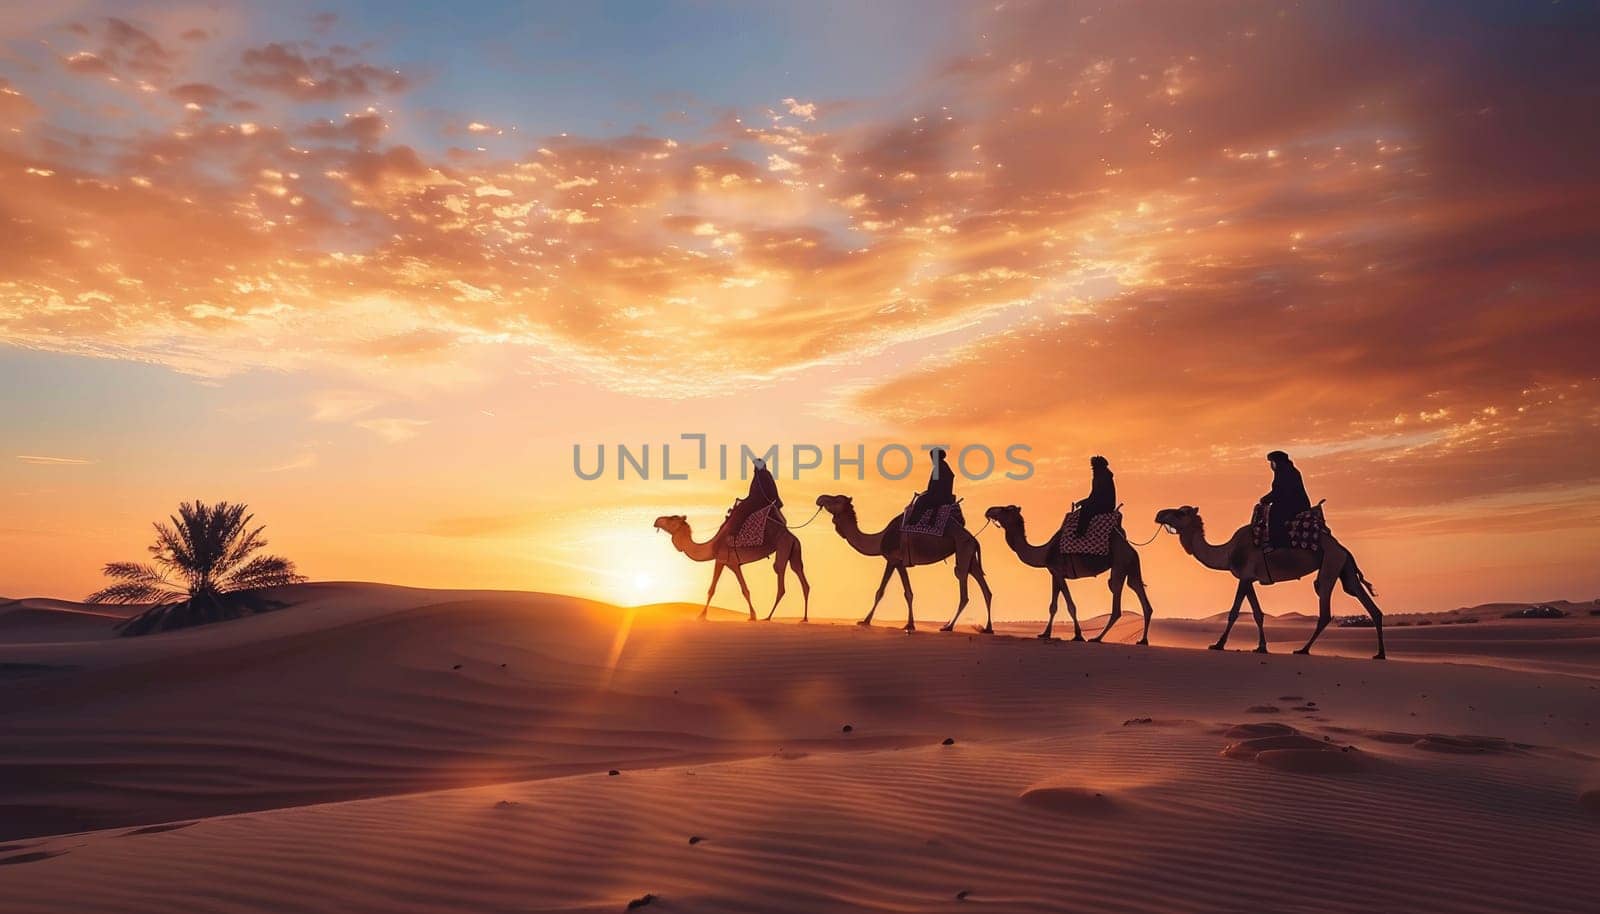 A group of camels are walking across a desert at sunset. The sky is filled with clouds and the sun is setting